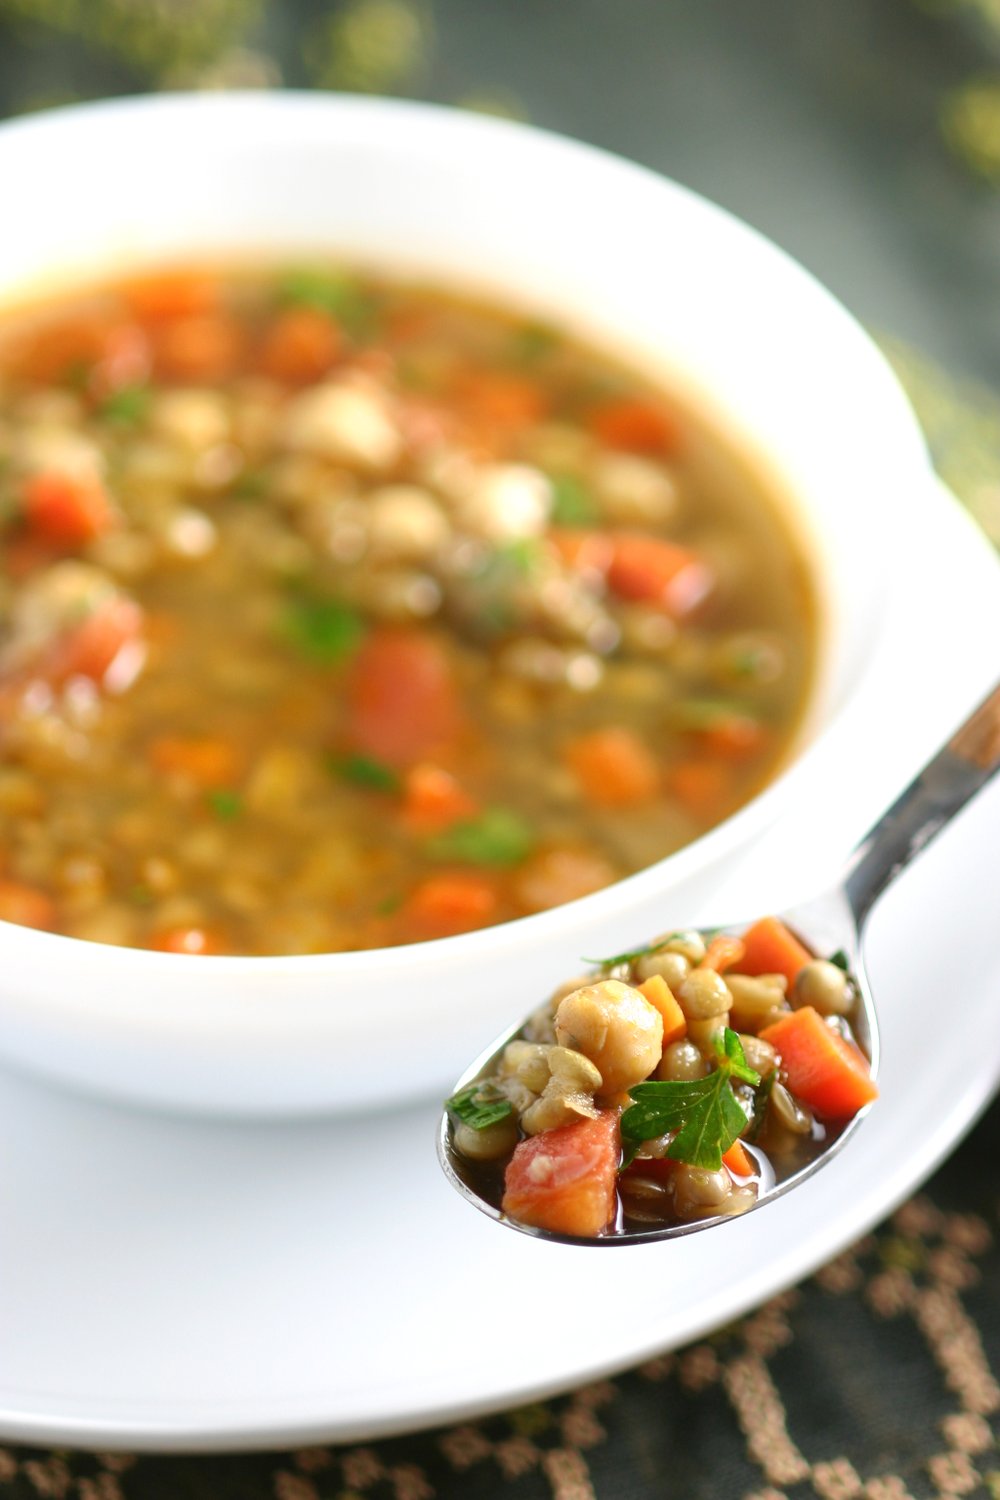 This Middle Eastern Green Lentil Soup features tender lentils, hearty chickpeas, and a spiced broth. Serve it as is or stir in some chopped greens.